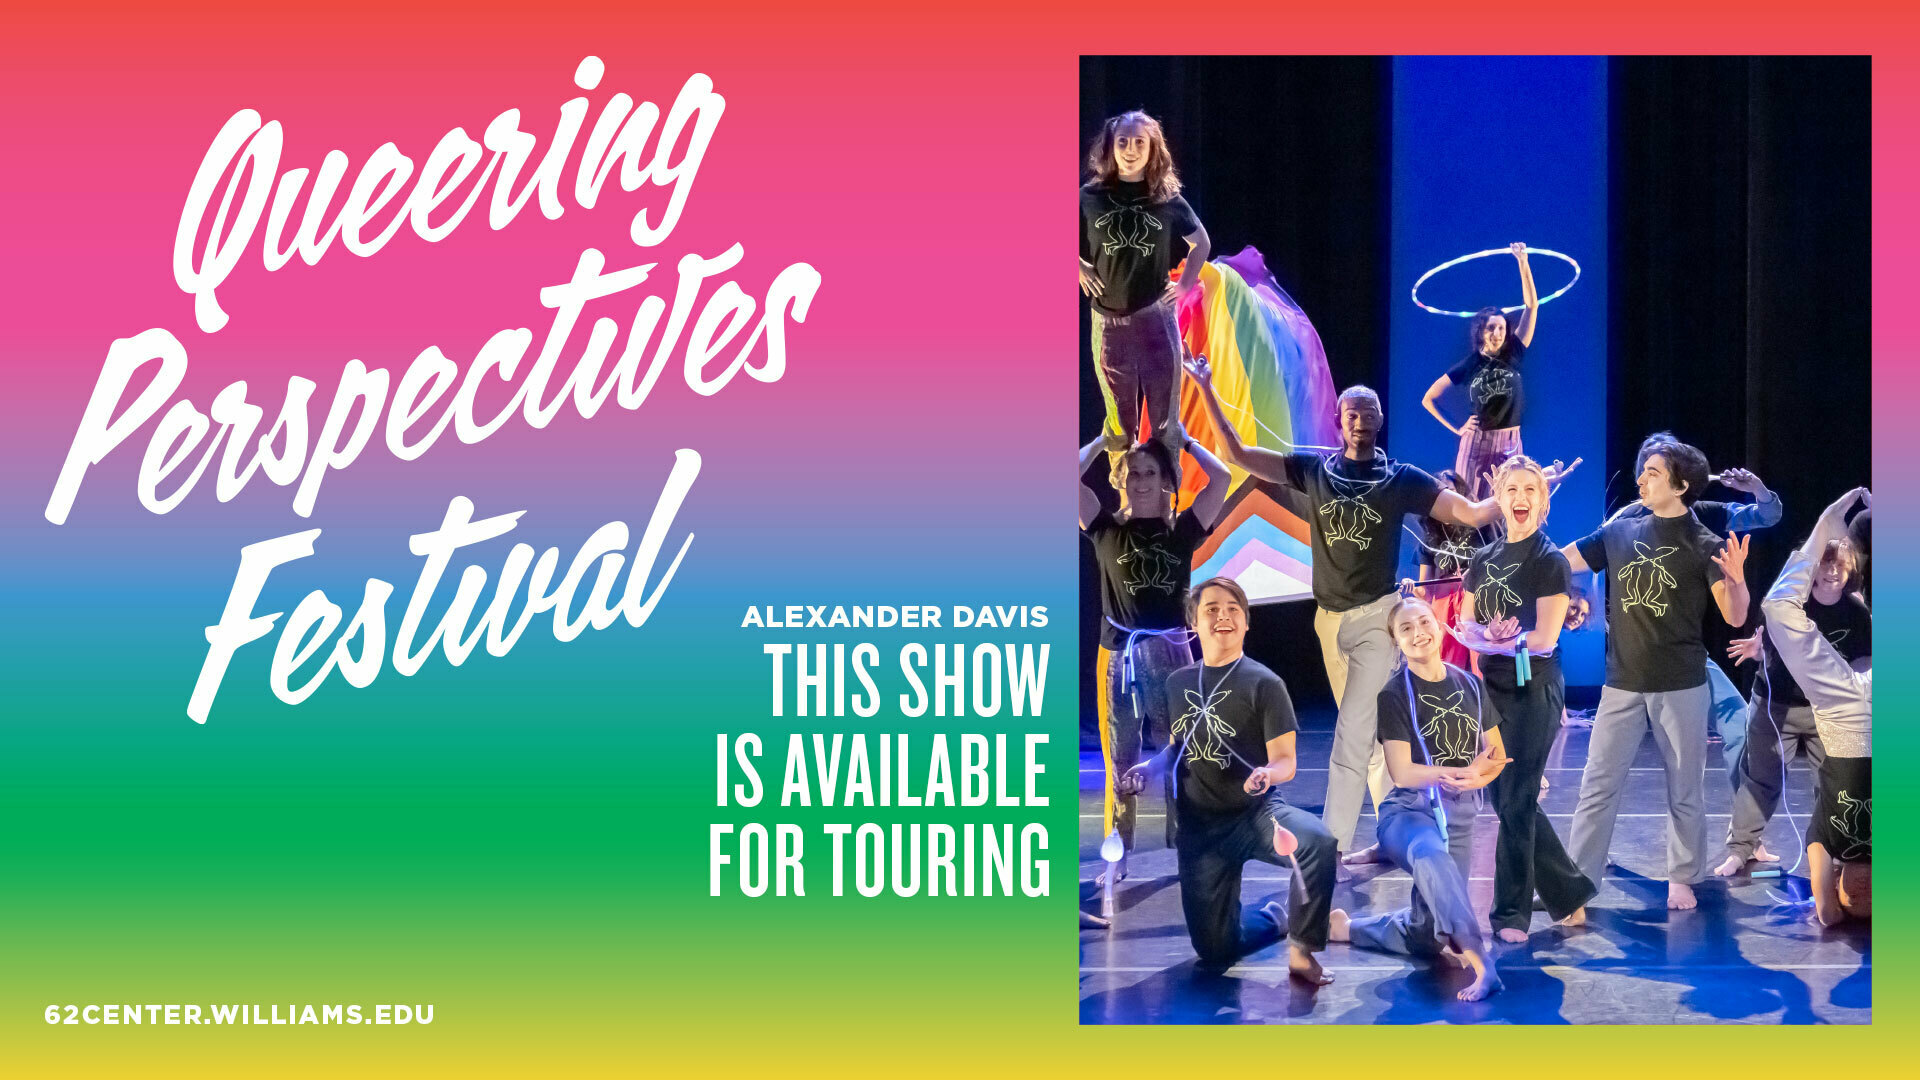 Queering Perspectives Festival: THIS SHOW IS AVAILABLE FOR TOURING, Williamstown, Massachusetts, United States